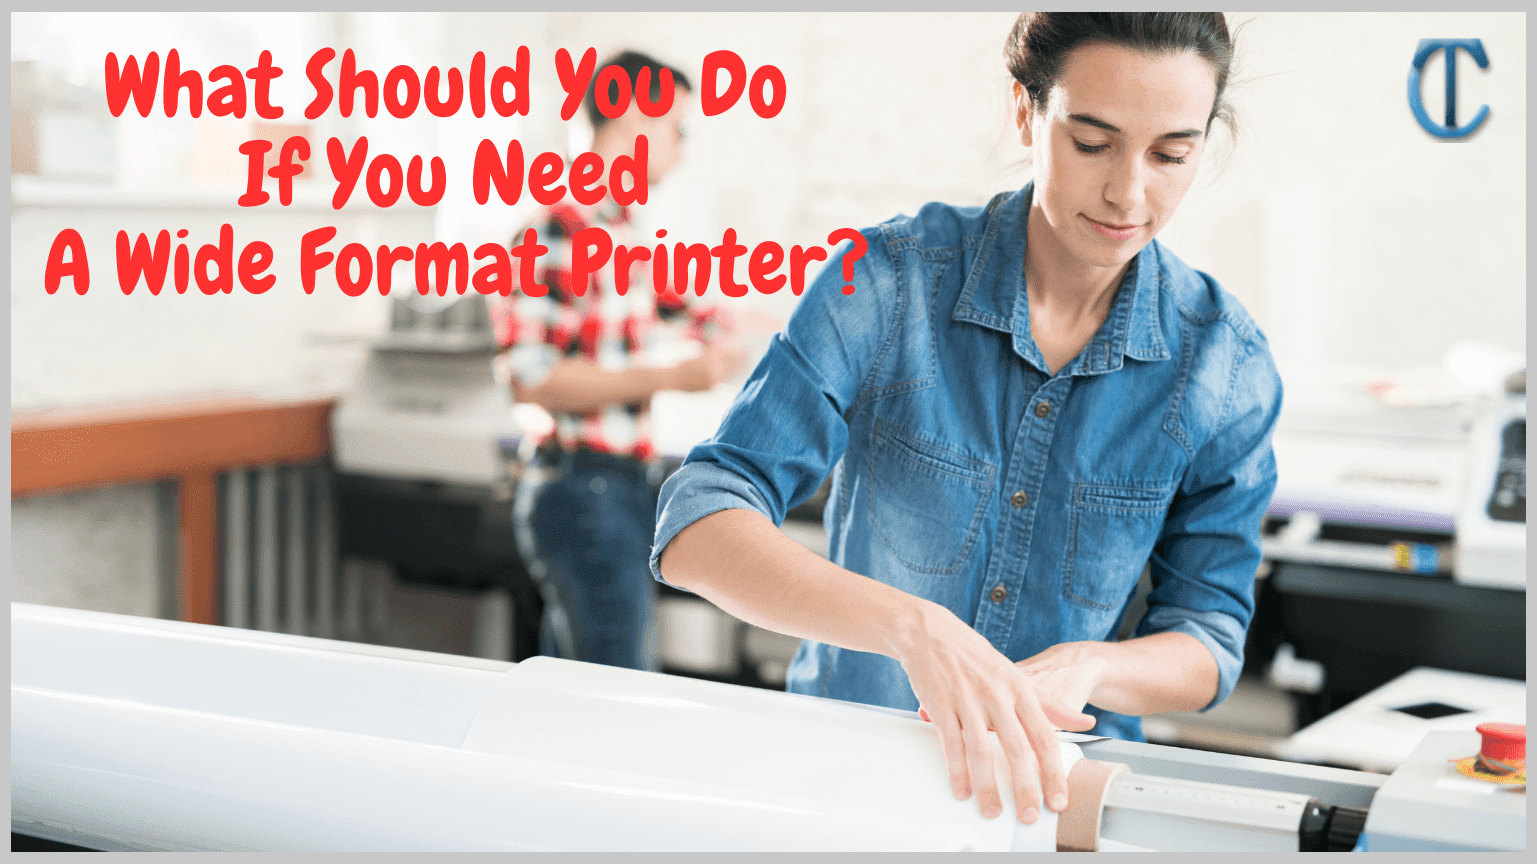 What should you do if you need a wide format printer?